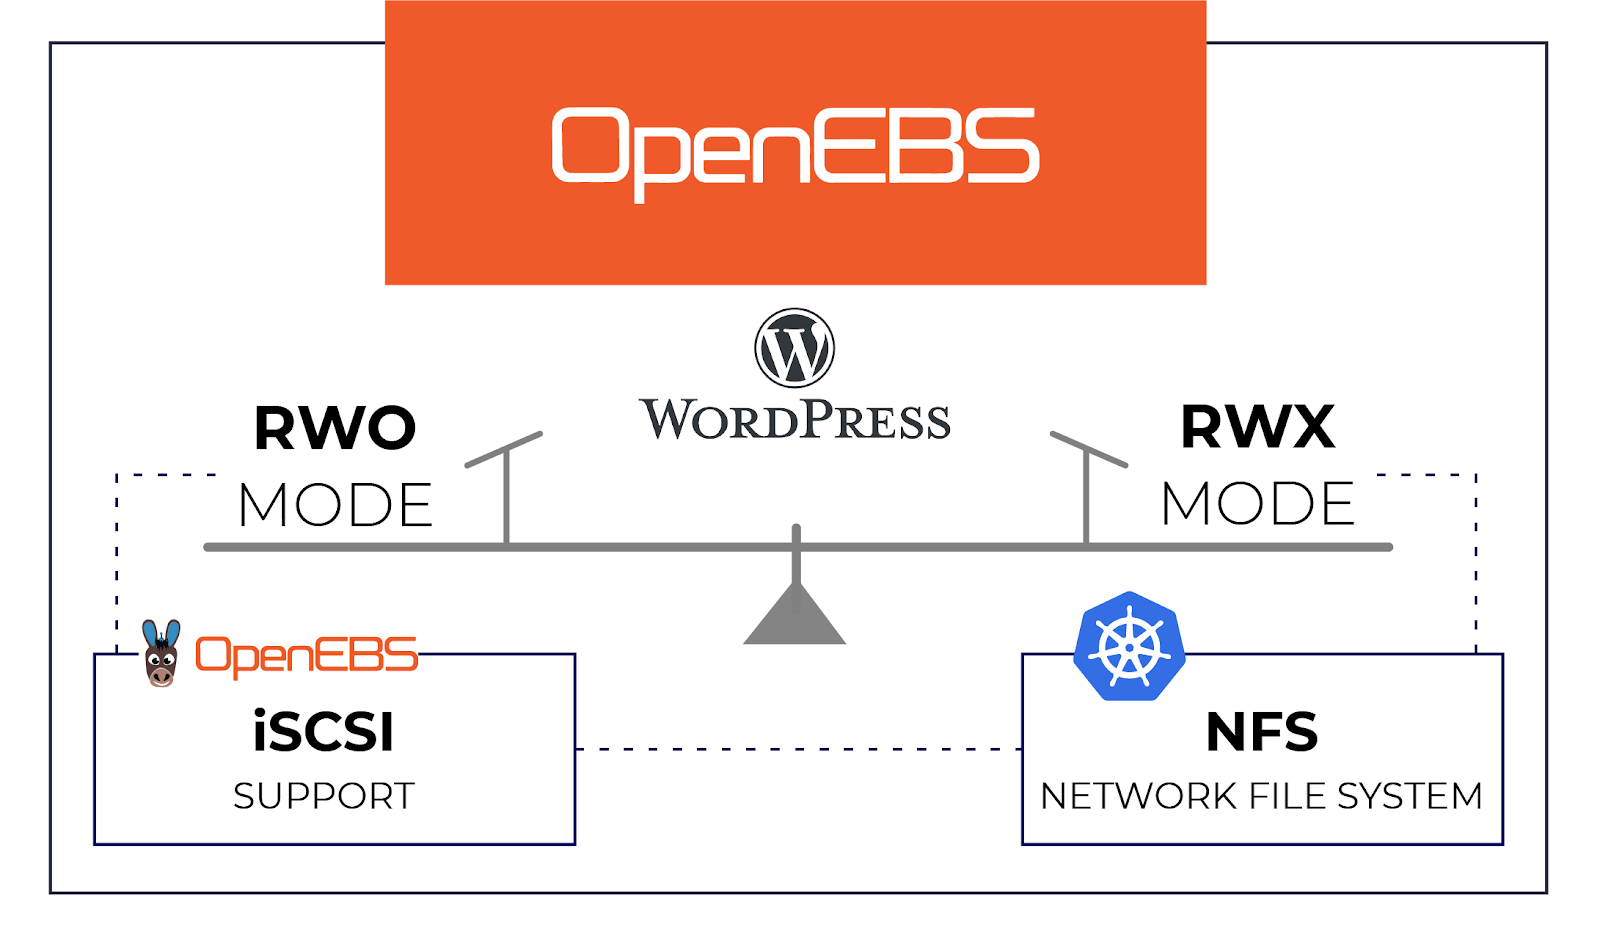                                                      WordPress with RWO and RWX over iSCSI and NFS